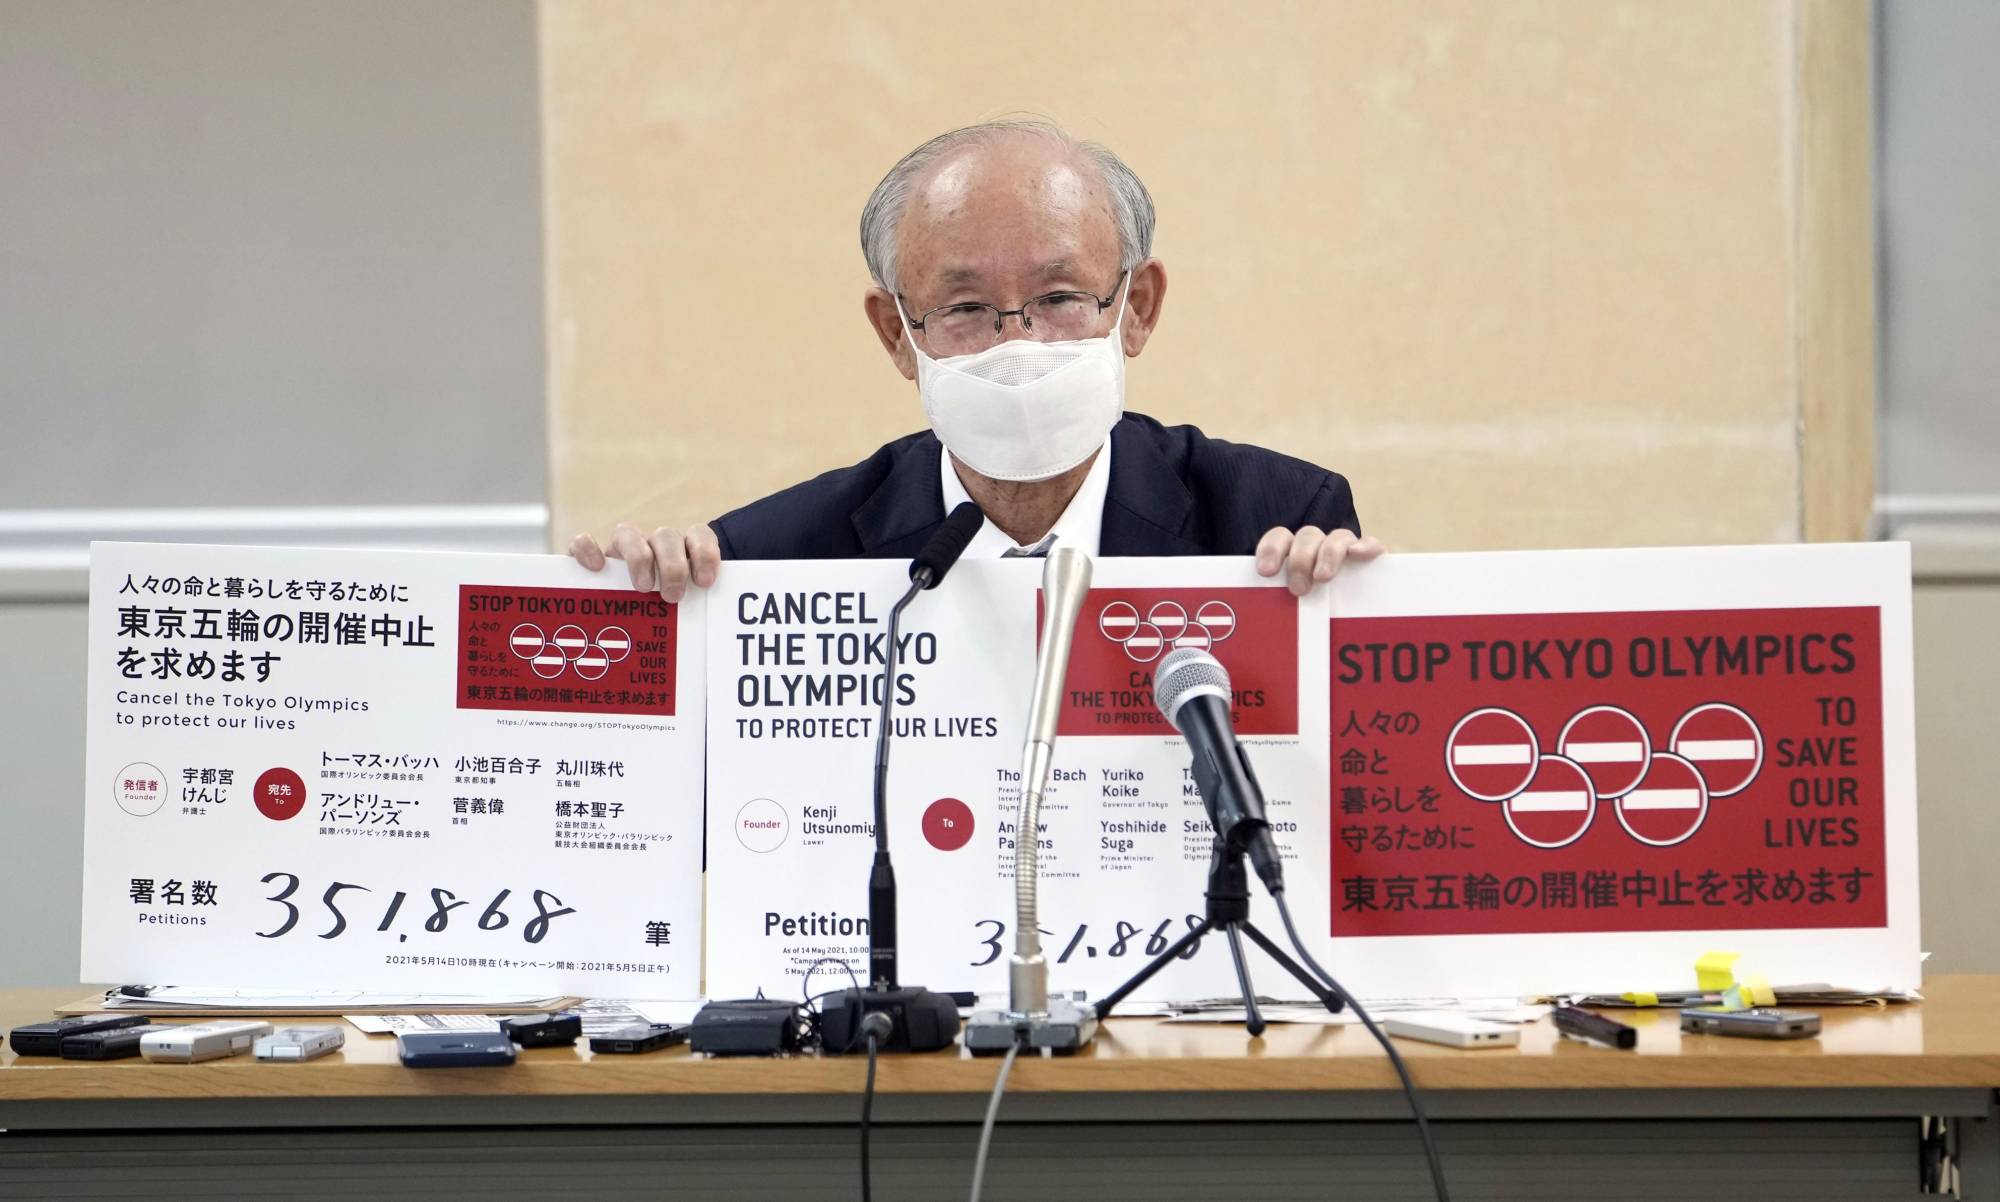 Kenji Utsunomiya shows the number of signatures gathered by an online campaign calling for cancellation of the Tokyo Olympic Games as he speaks at a Friday news conference at the Tokyo Metropolitan Government building. | KYODO